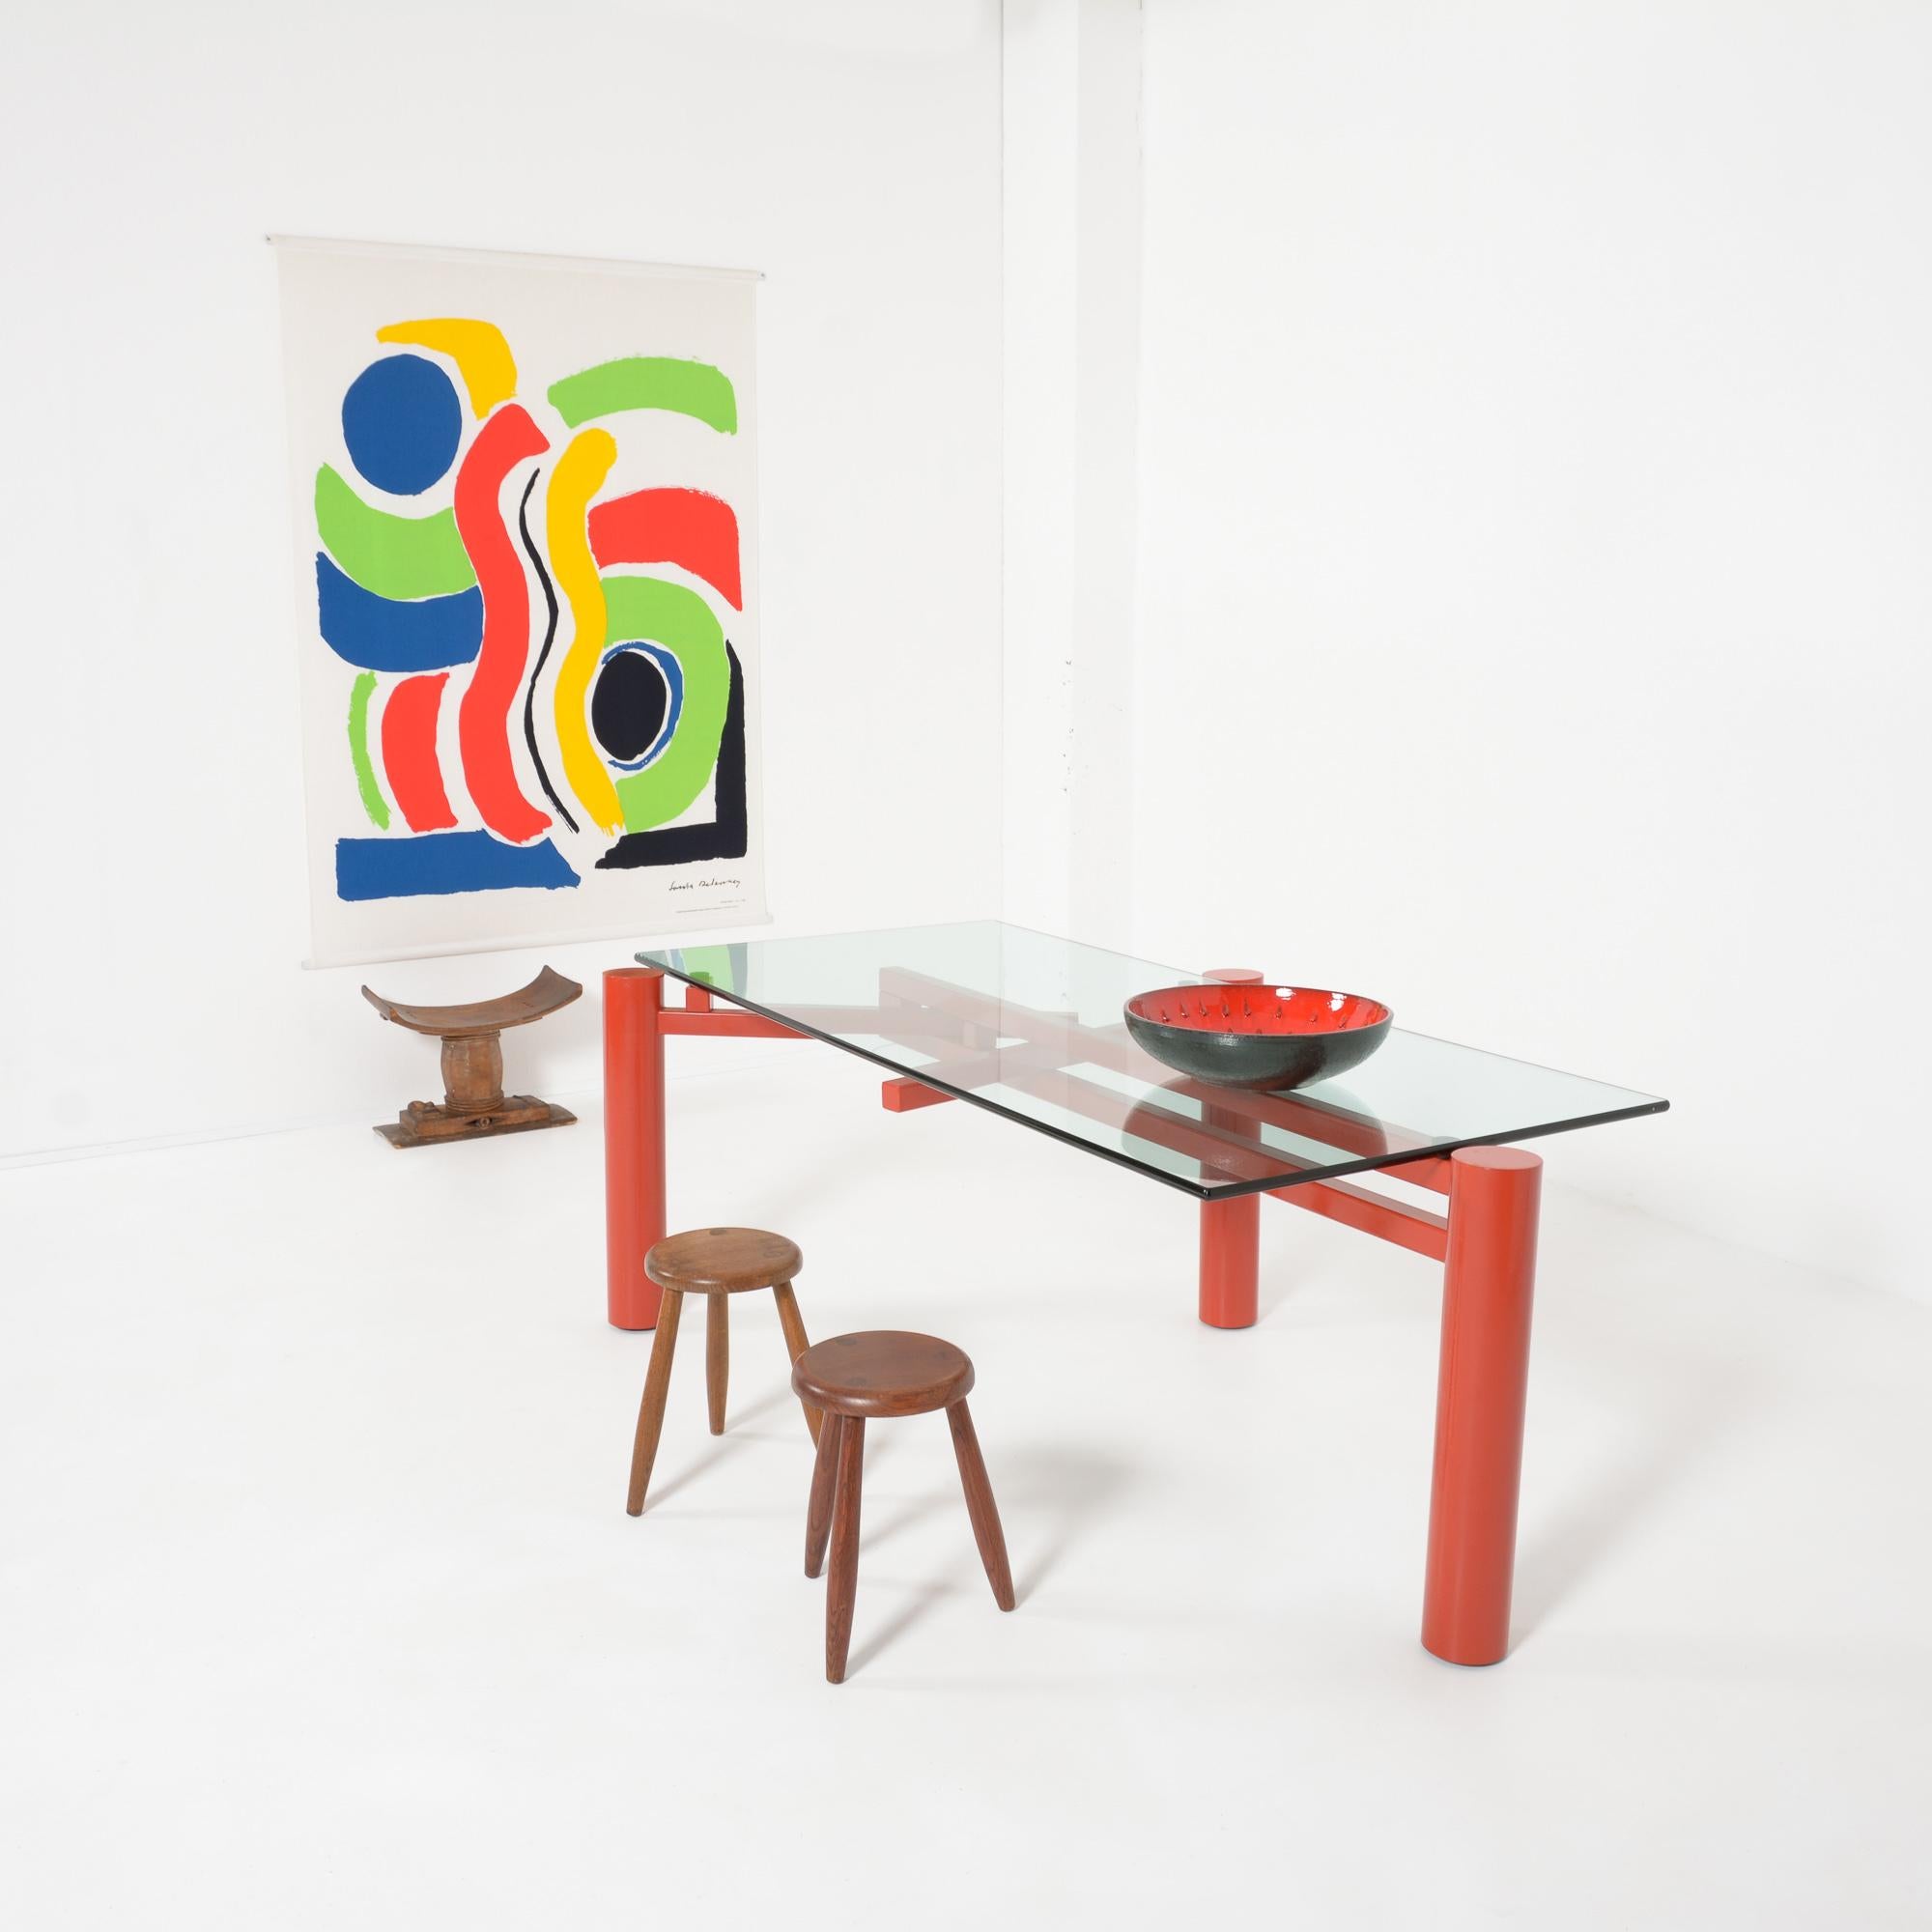 This constructivist dining table was designed by Christophe Gevers and edited by be.classics in 2001.
The heavy red-orange metal base consists of 3 legs that can be placed in different positions so that the rectangular glass top can be changed into